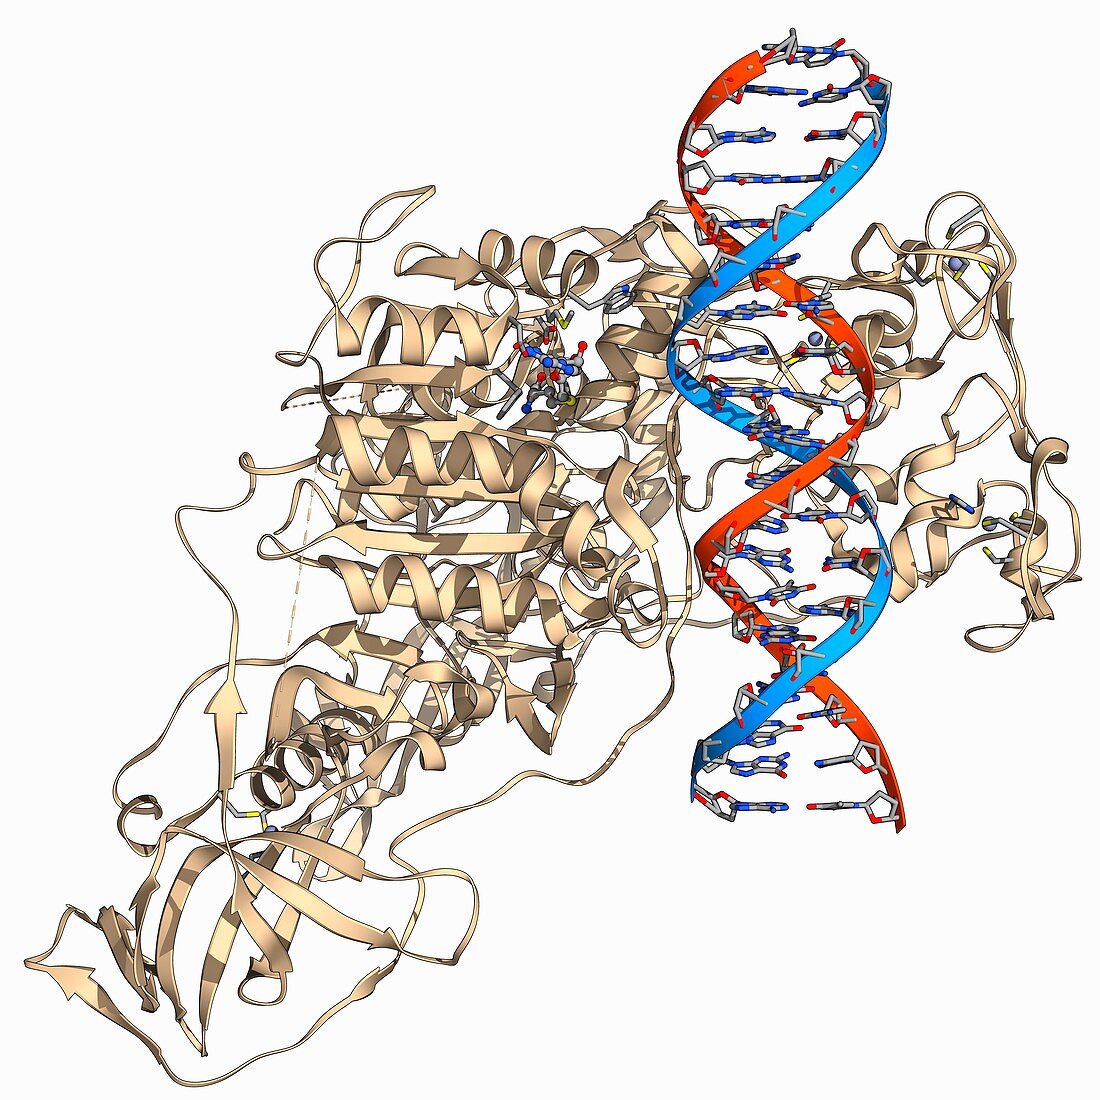 Methyltransferase complexed with DNA